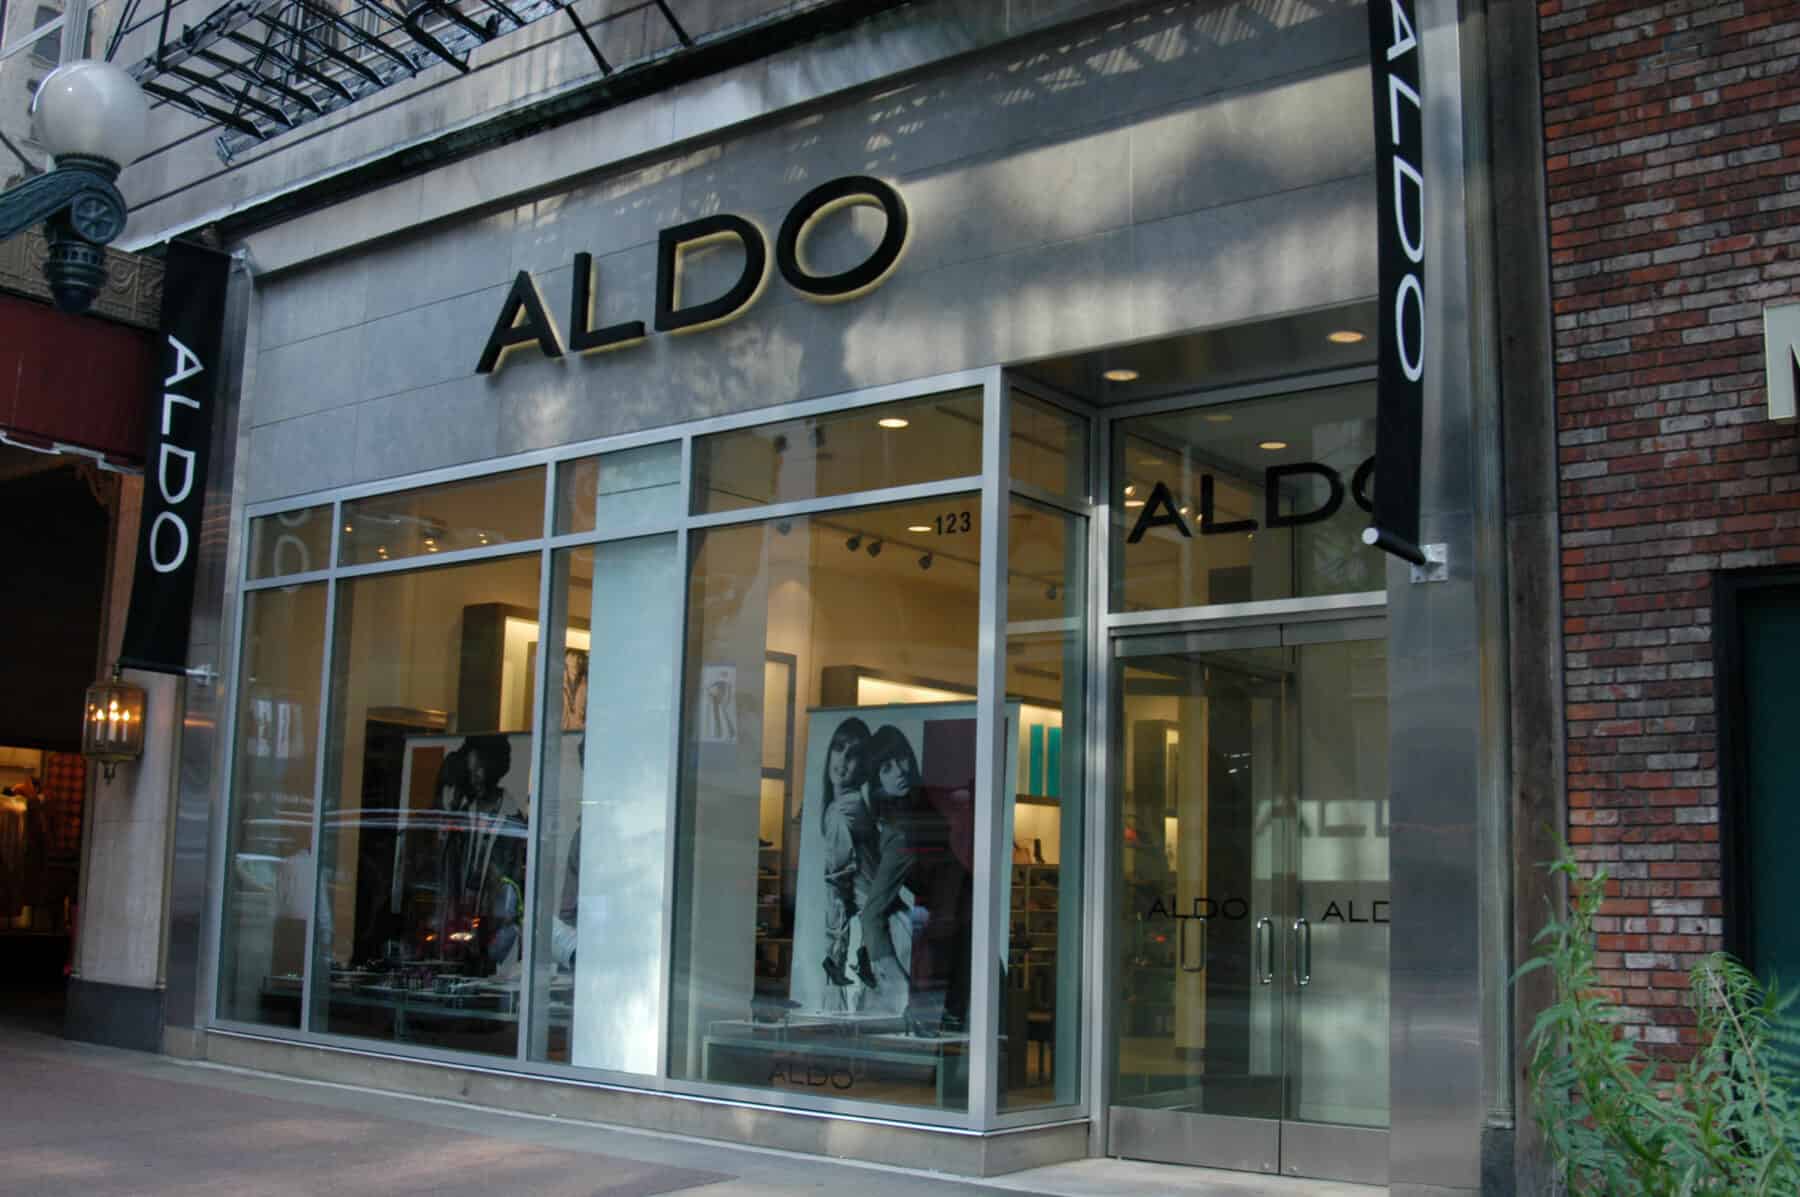 Aldo Store Remodel Including Custom Metal and Stonework in Contemporary Style by Commercial Builder & General Contractor Structural Enterprises